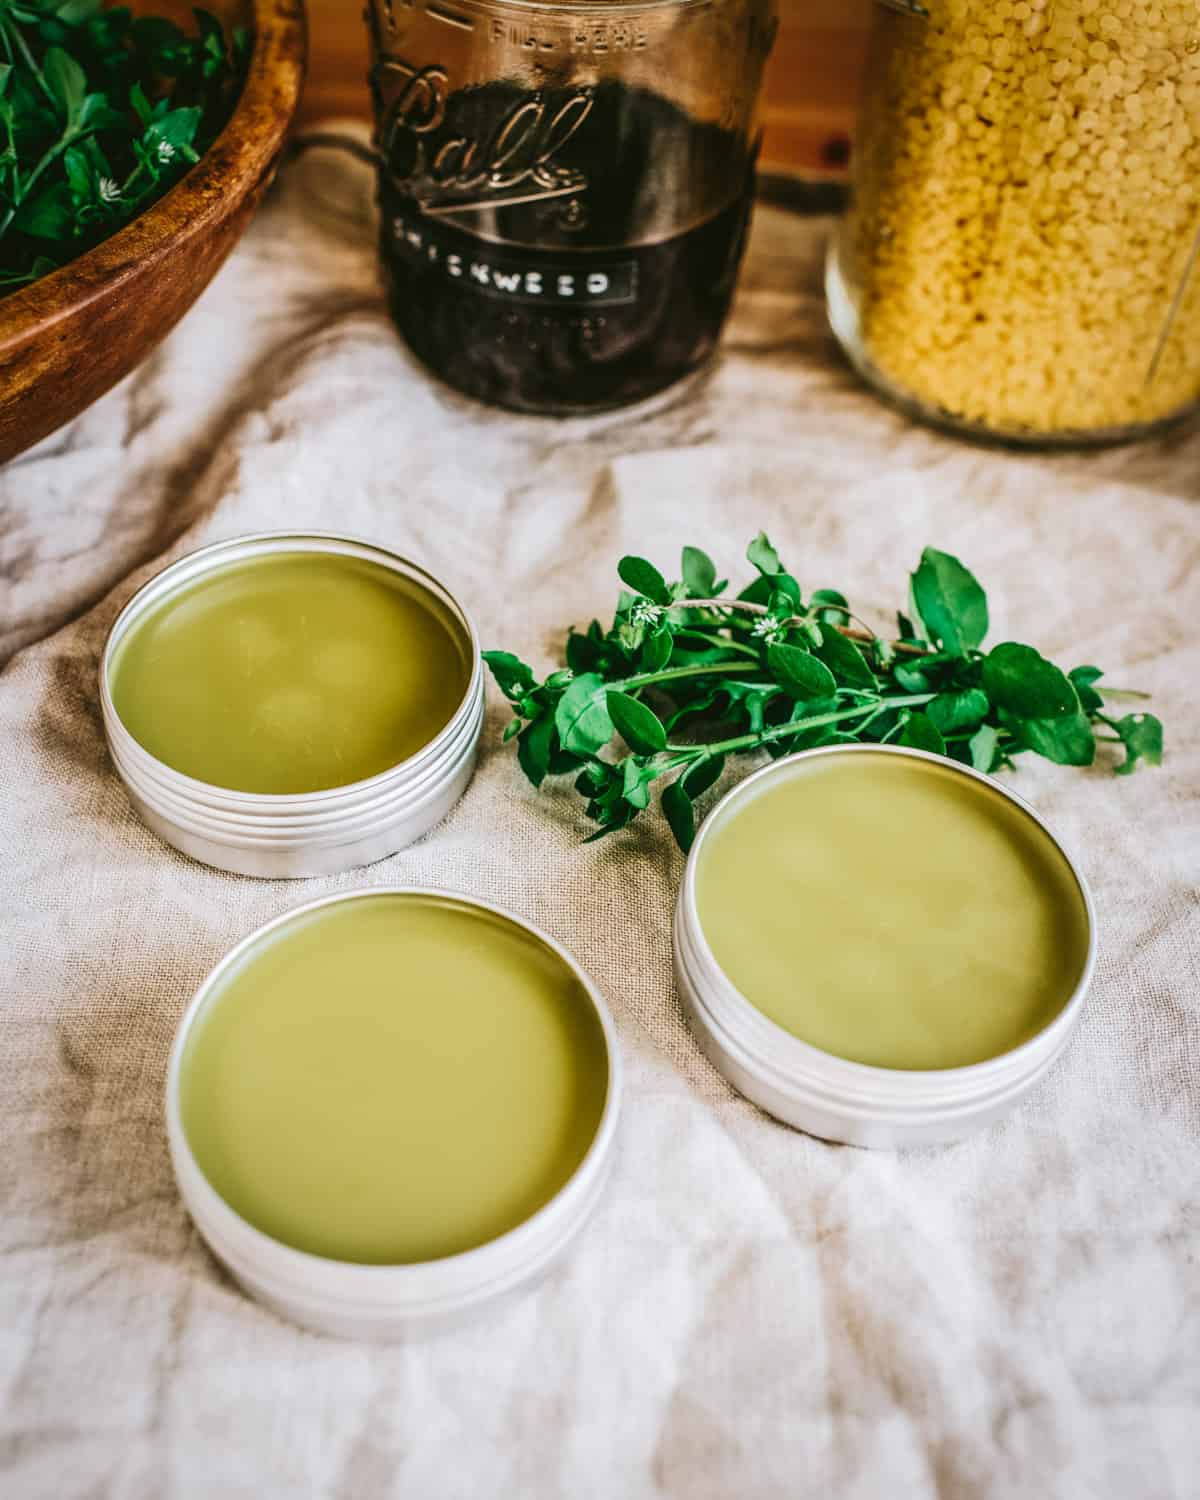 Chickweed salve in tins next to ingredients to make the salve. 